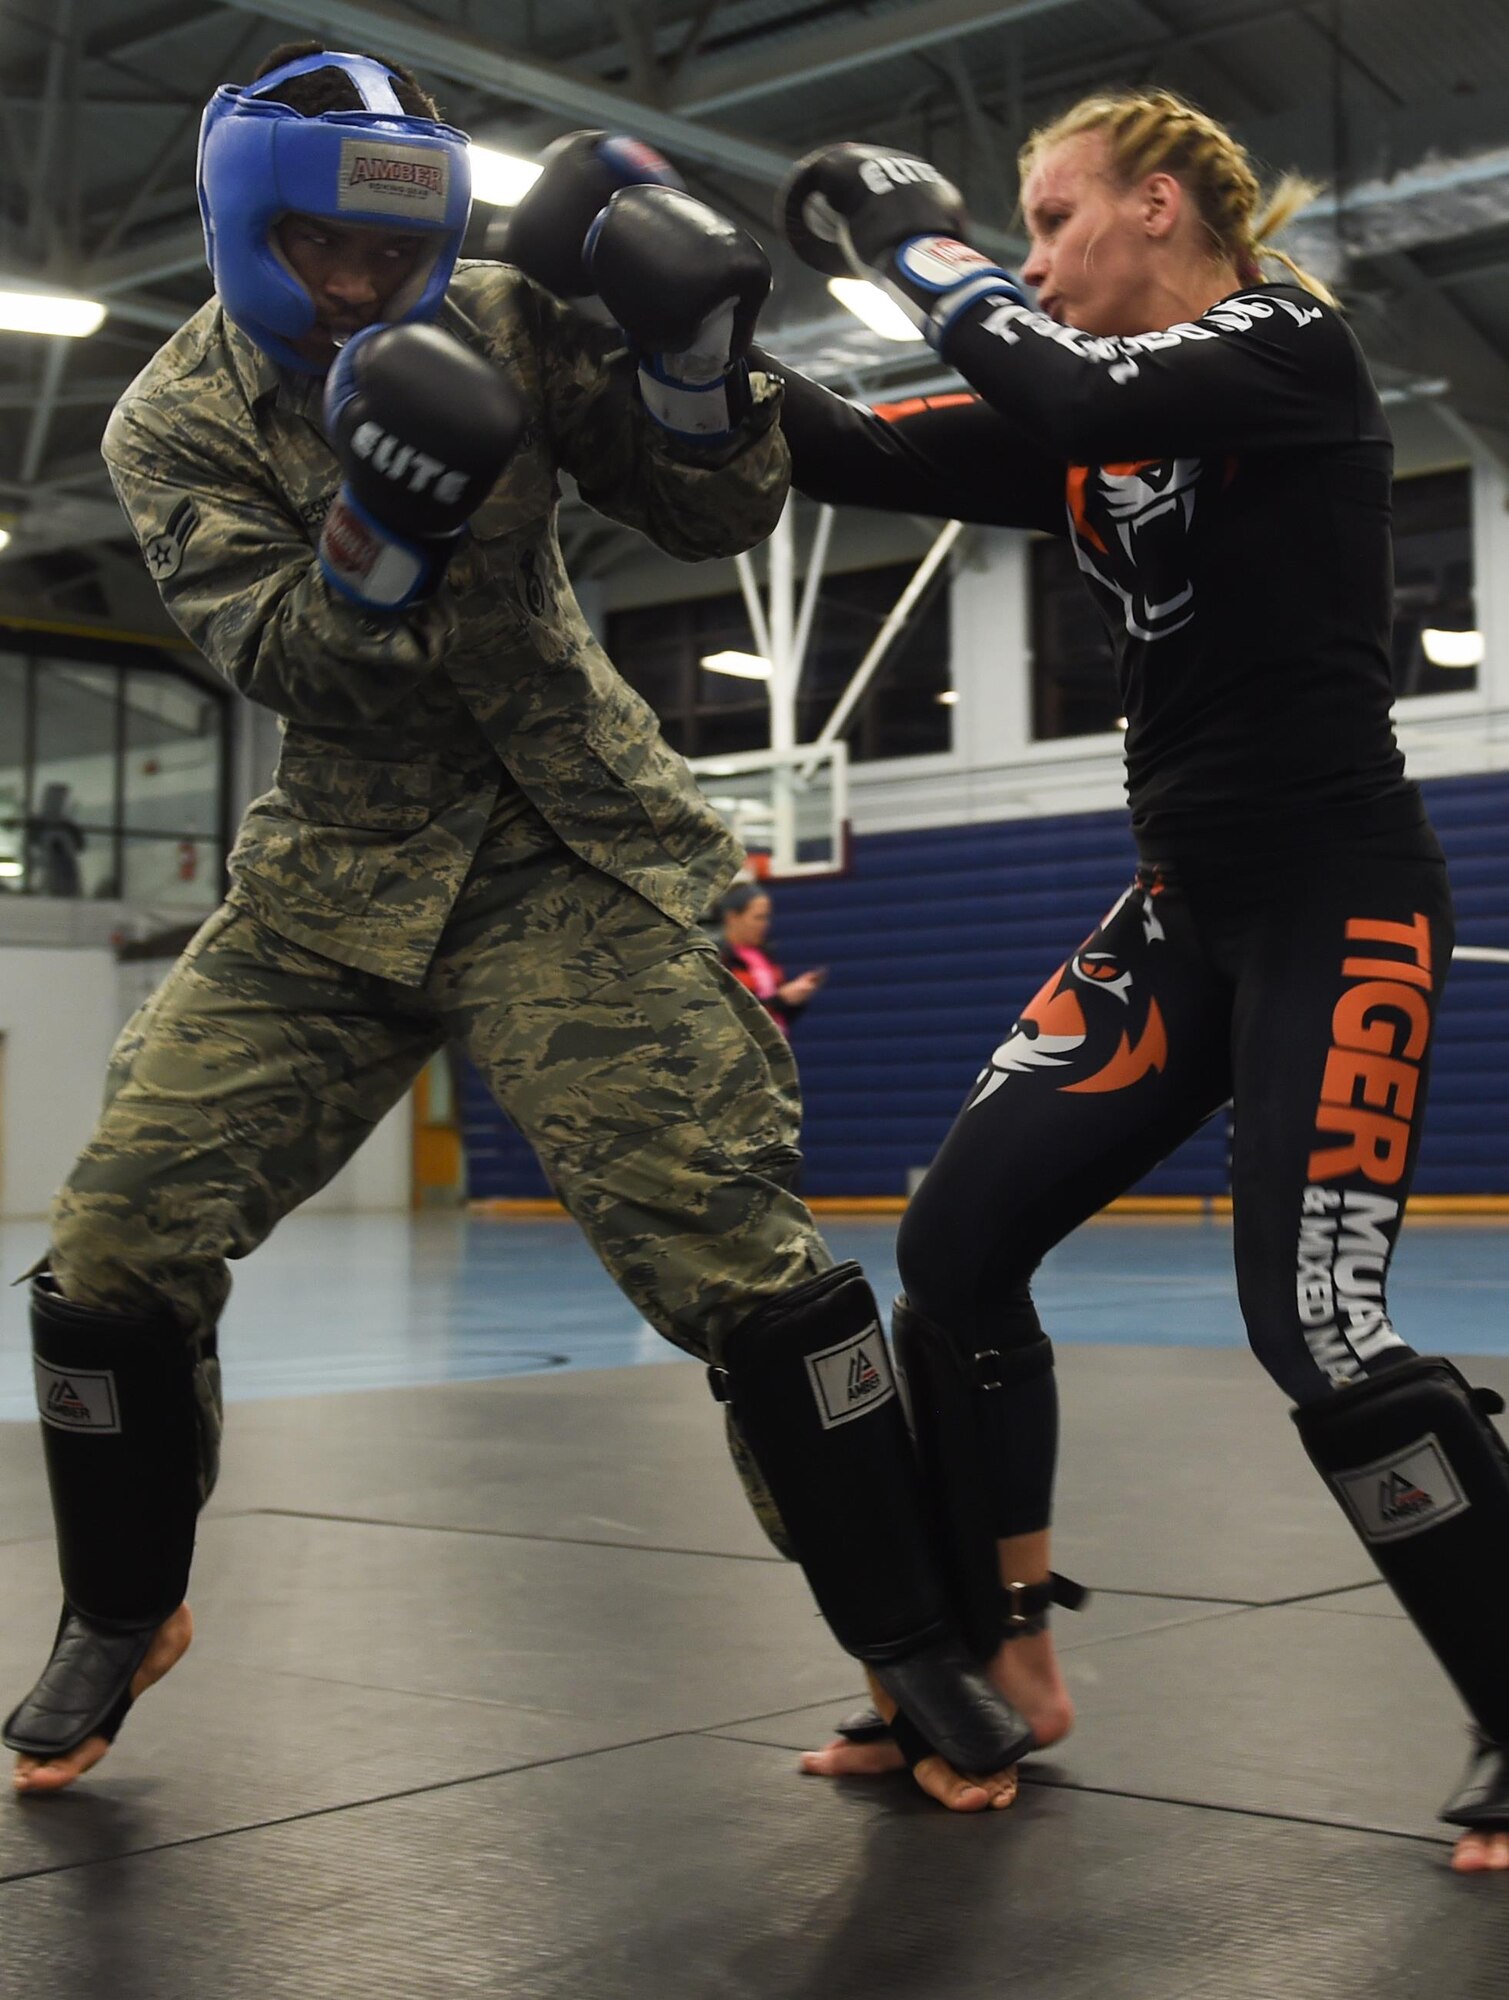 U.S. Air Force Airman 1st Class Ramon Crespo, 633rd Security Forces Squadron entry control point monitor, spars with Valentina Shevchenko, UFC Bantamweight fighter, at Joint Base Langley-Eustis, Va., Dec. 8, 2016. Schevchenko visited the installation along with UFC fighters, Ben Rothwell and Lorenz Larkin as well as MMAradio hosts and Jacob ‘Stitch’ Durand. (U.S. Air Force photo by Staff Sgt. Natasha Stannard)